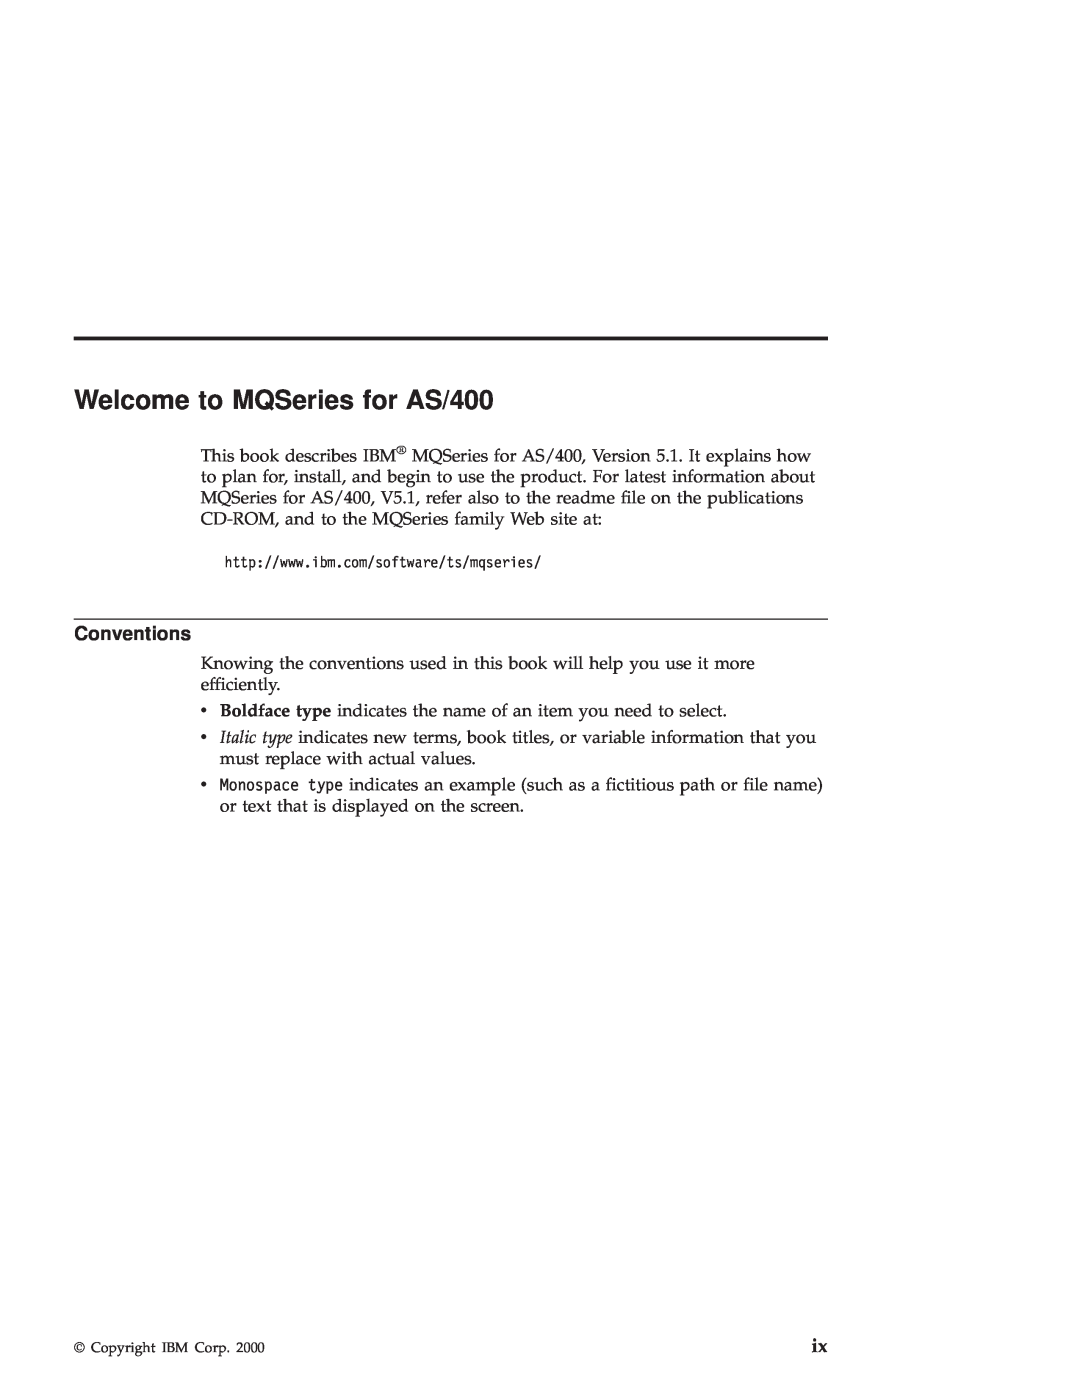 IBM GC34-5557-00 manual Welcome to MQSeries for AS/400, Conventions 